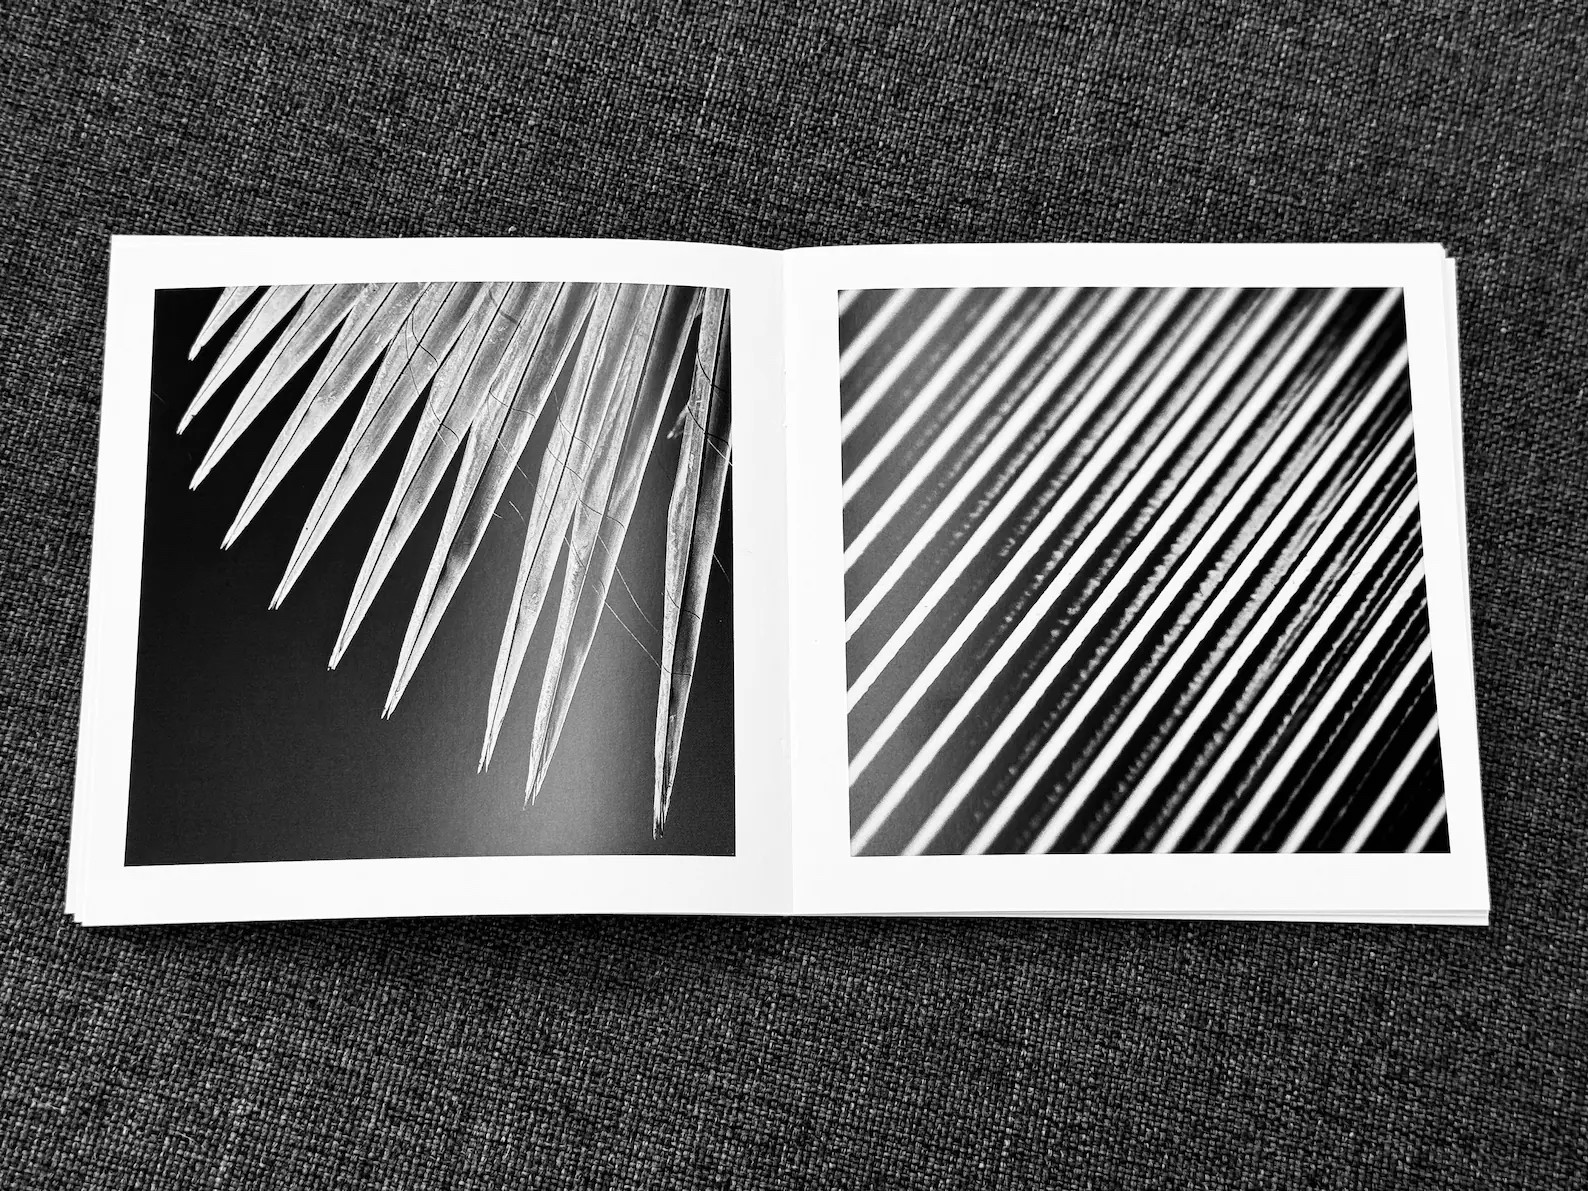 The image shows an open book with two black and white photographs on a gray fabric surface. On the left page, there's a close-up photograph of what appears to be palm fronds or similar long, narrow leaves extending diagonally across the frame from bottom left to top right, with their pointed tips lit up, creating a sense of depth and texture. The right page features a photograph with a pattern of parallel diagonal lines filling the frame, creating a visual rhythm and the illusion of movement or vibration. The lines have varying widths and spacing, suggesting they might be shadows or reflections on a ridged surface. The contrasting textures and patterns of both images create a dynamic visual experience.